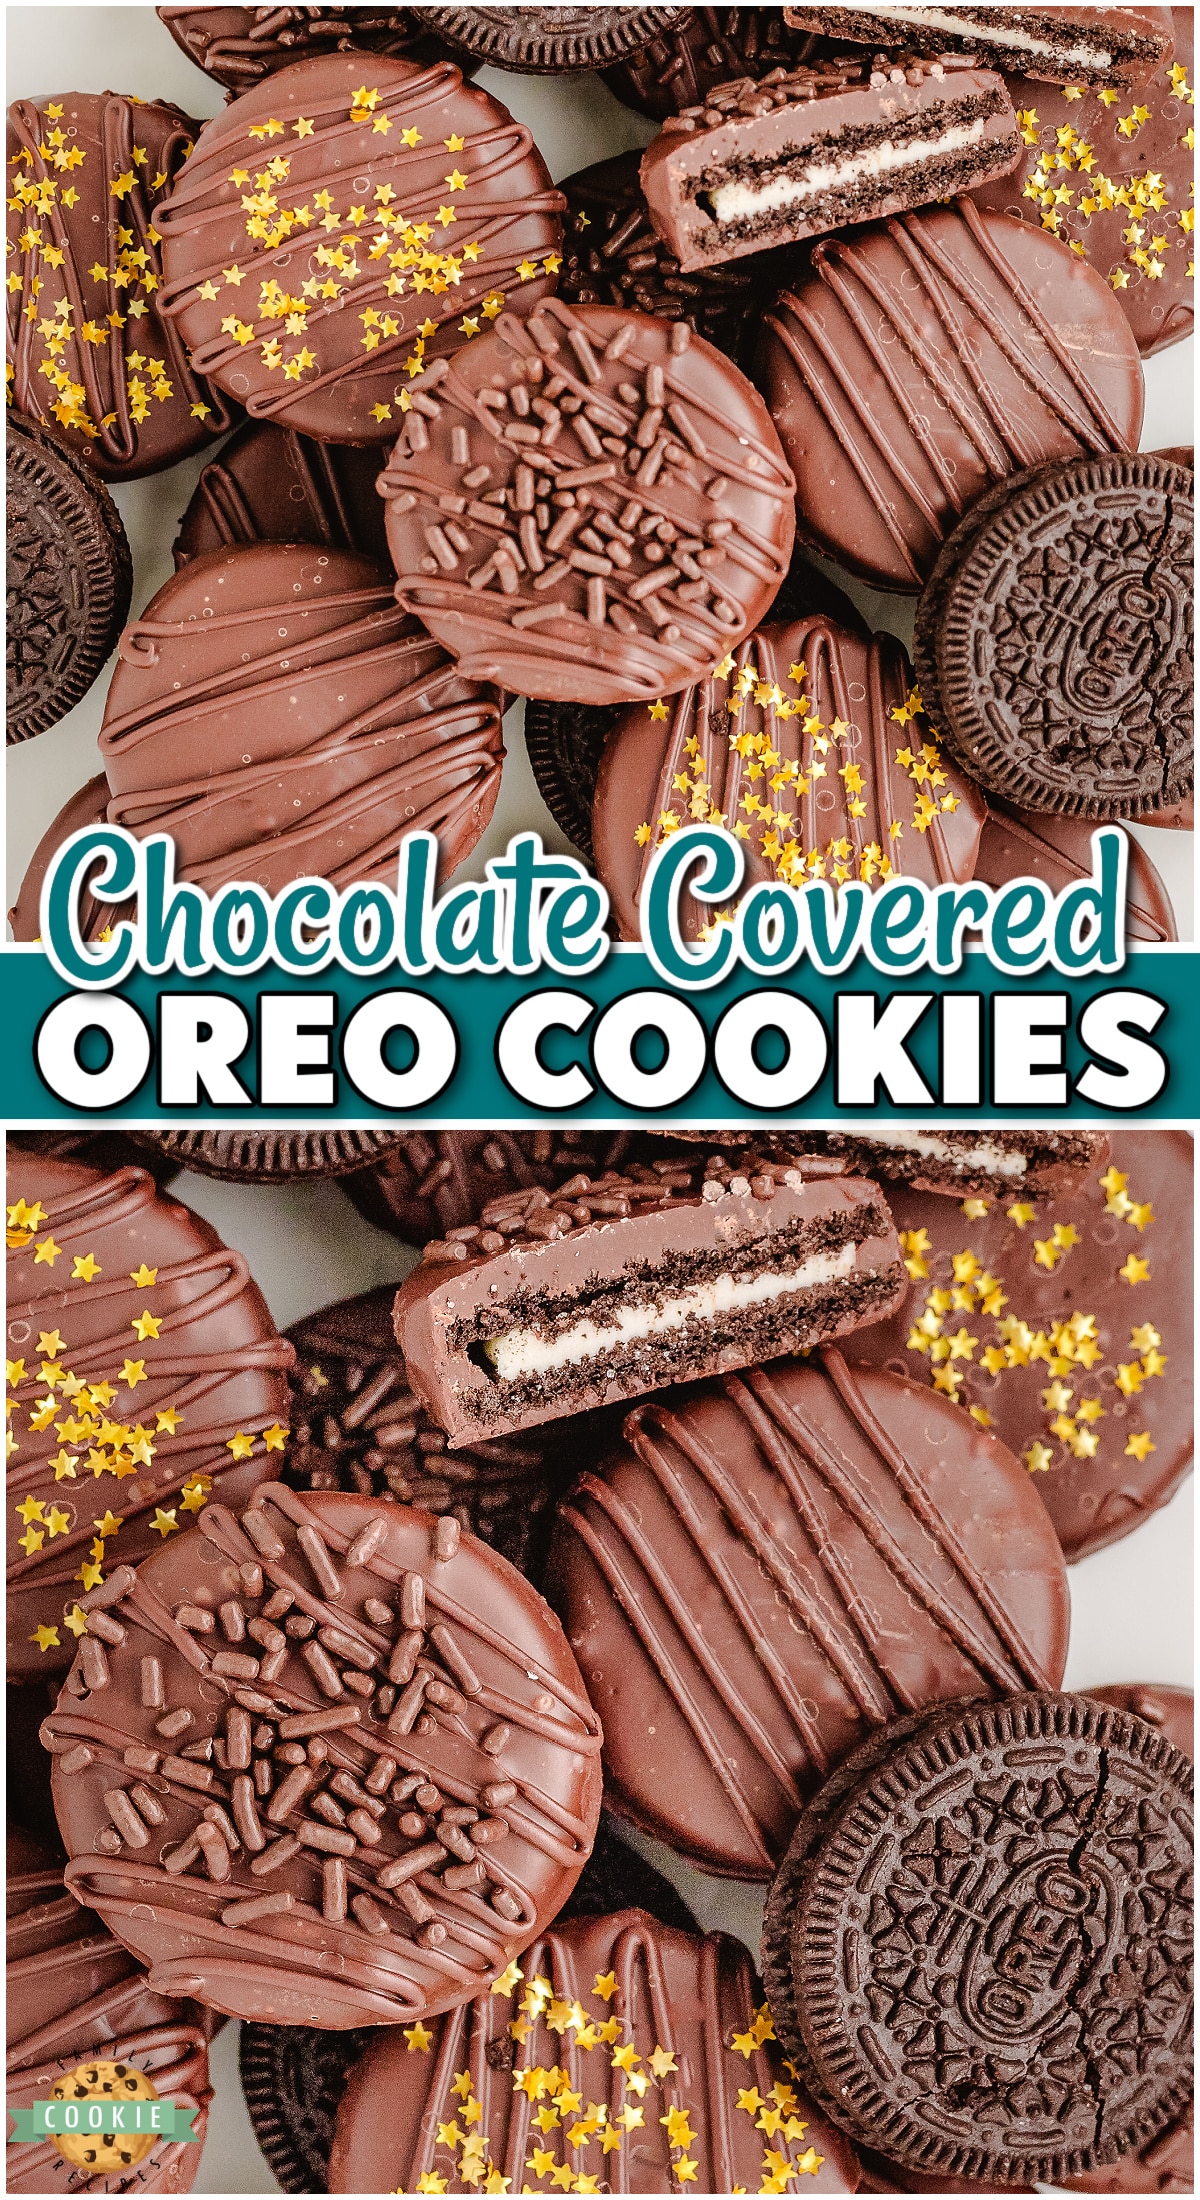 Chocolate dipped Oreos made with a few simple ingredients for an easy, decadent treat! Drizzle them in chocolate, top them with sprinkles & enjoy! 